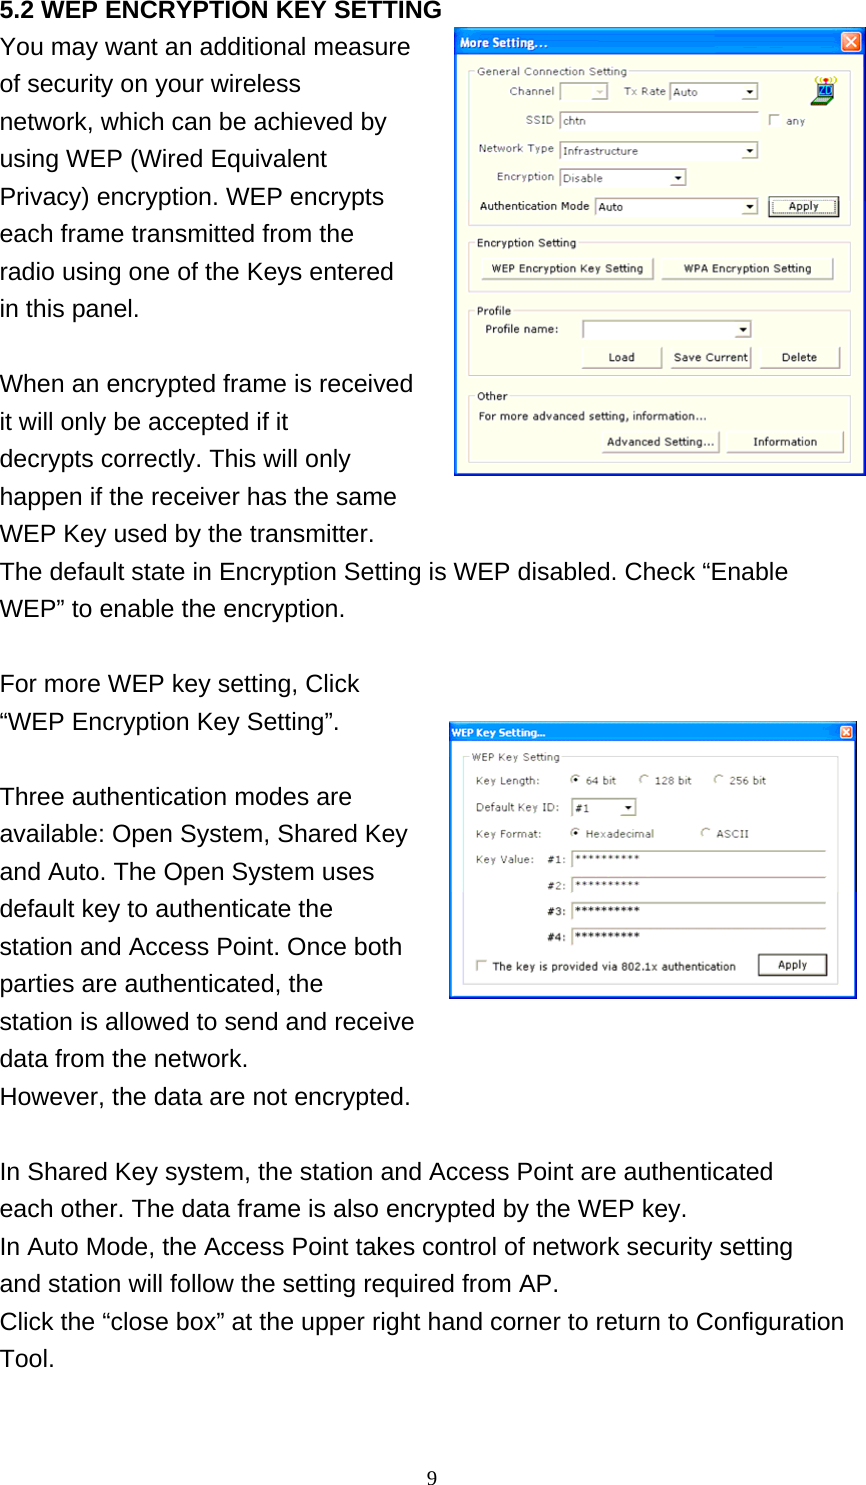    9 5.2 WEP ENCRYPTION KEY SETTING You may want an additional measure   of security on your wireless network, which can be achieved by using WEP (Wired Equivalent Privacy) encryption. WEP encrypts each frame transmitted from the radio using one of the Keys entered in this panel.  When an encrypted frame is received it will only be accepted if it decrypts correctly. This will only happen if the receiver has the same WEP Key used by the transmitter. The default state in Encryption Setting is WEP disabled. Check “Enable WEP” to enable the encryption.    For more WEP key setting, Click “WEP Encryption Key Setting”.  Three authentication modes are available: Open System, Shared Key and Auto. The Open System uses default key to authenticate the station and Access Point. Once both parties are authenticated, the station is allowed to send and receive data from the network. However, the data are not encrypted.  In Shared Key system, the station and Access Point are authenticated each other. The data frame is also encrypted by the WEP key. In Auto Mode, the Access Point takes control of network security setting and station will follow the setting required from AP. Click the “close box” at the upper right hand corner to return to Configuration Tool.  